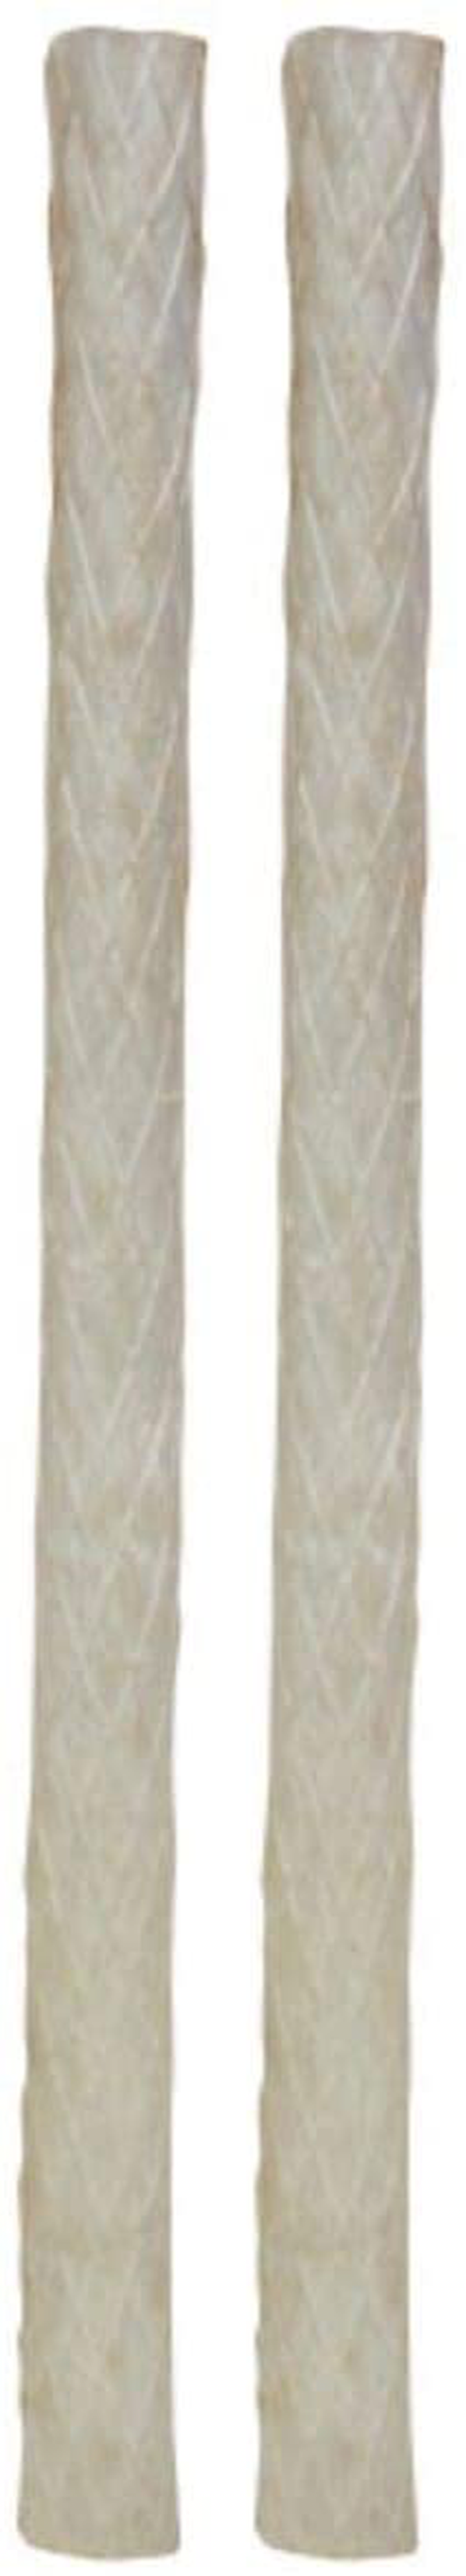 TIKI 1319119 Brand 2-Pack 9 Inch Replacement Torch Wicks White Case of 12, Count